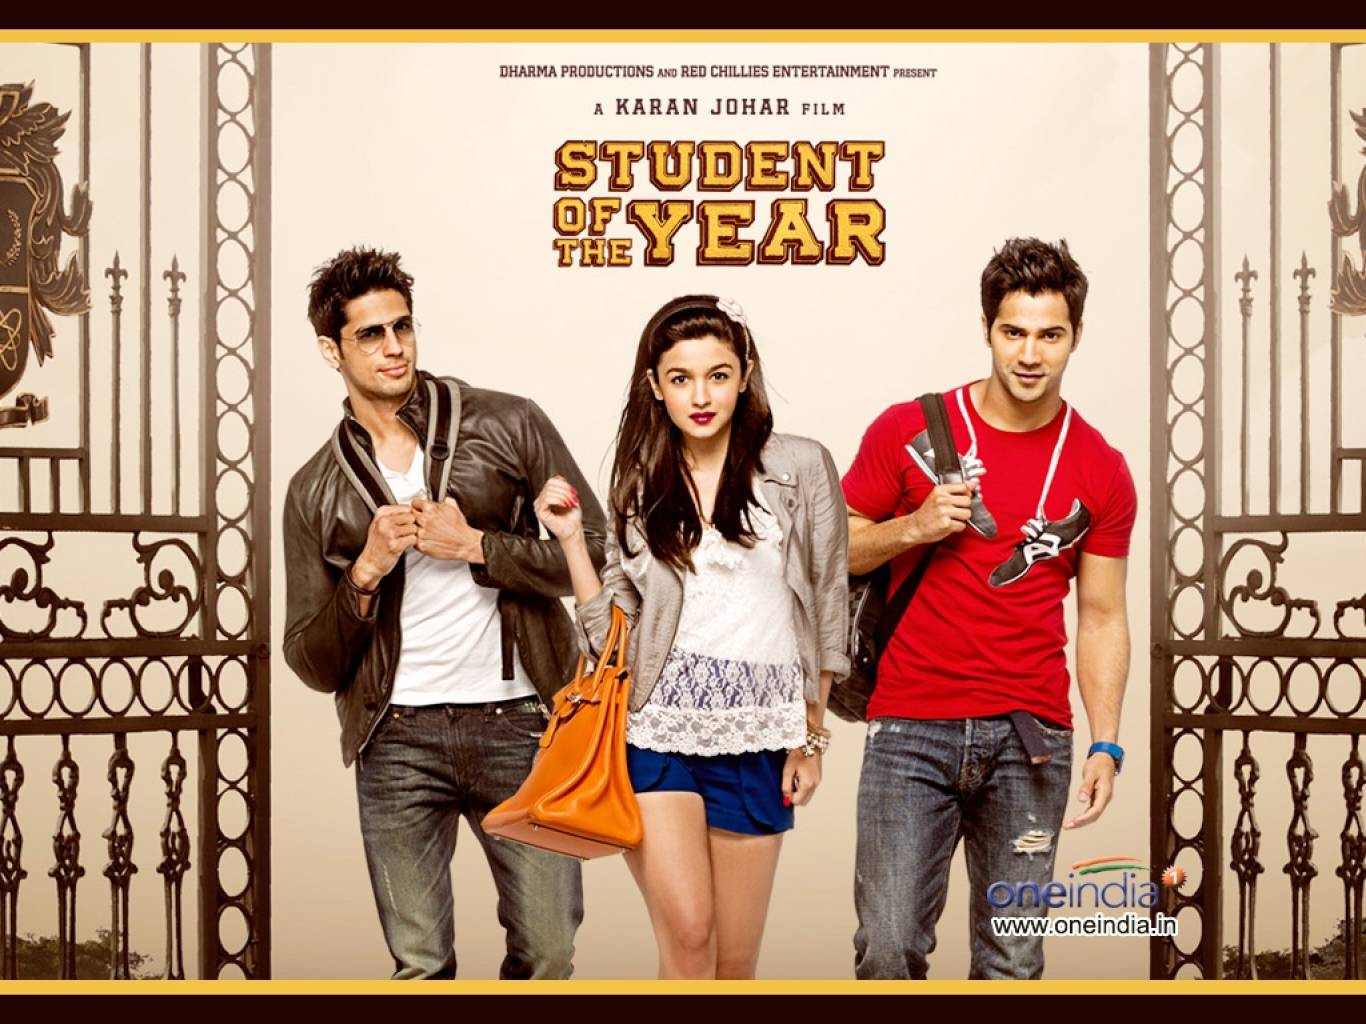 Student Of The Year Movie HD Wallpaper. Student Of The Year HD Movie Wallpaper Free Download (1080p to 2K)